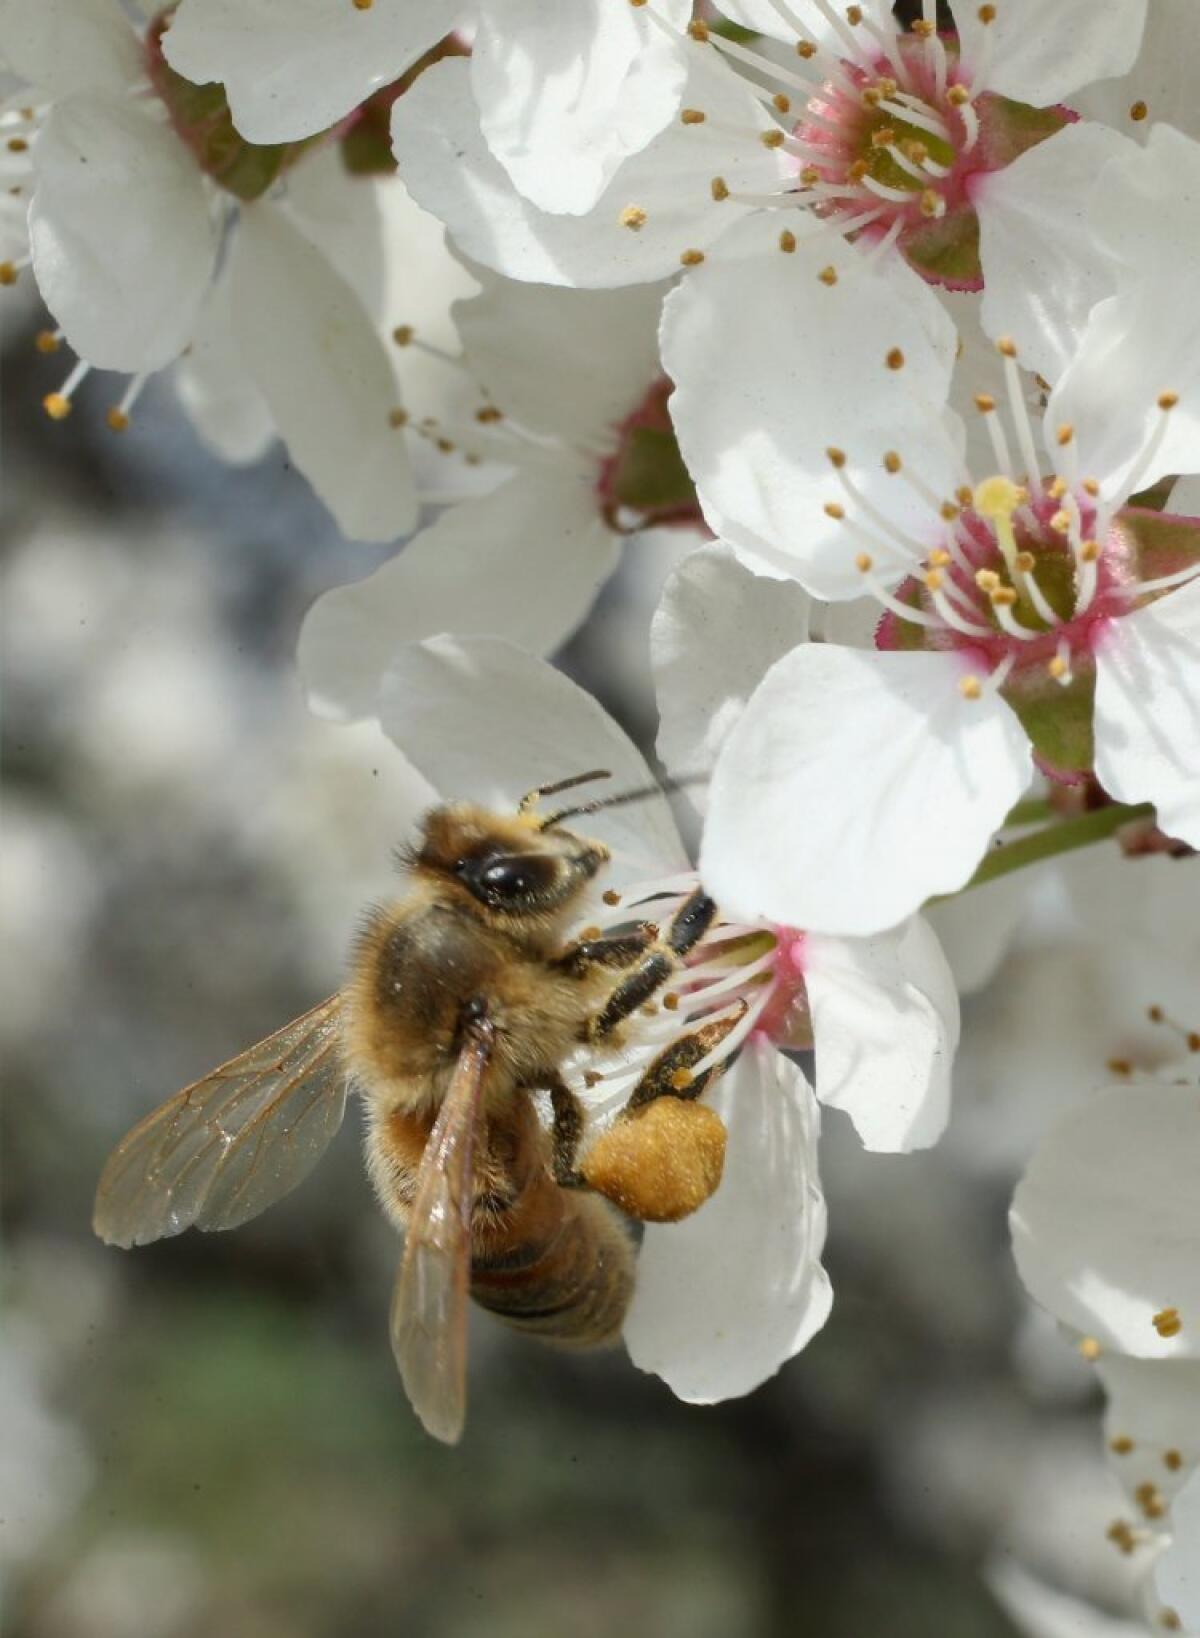 A bee harvests pollen from the flowers of a wild cherry tree in Blankenfelde, Germany.